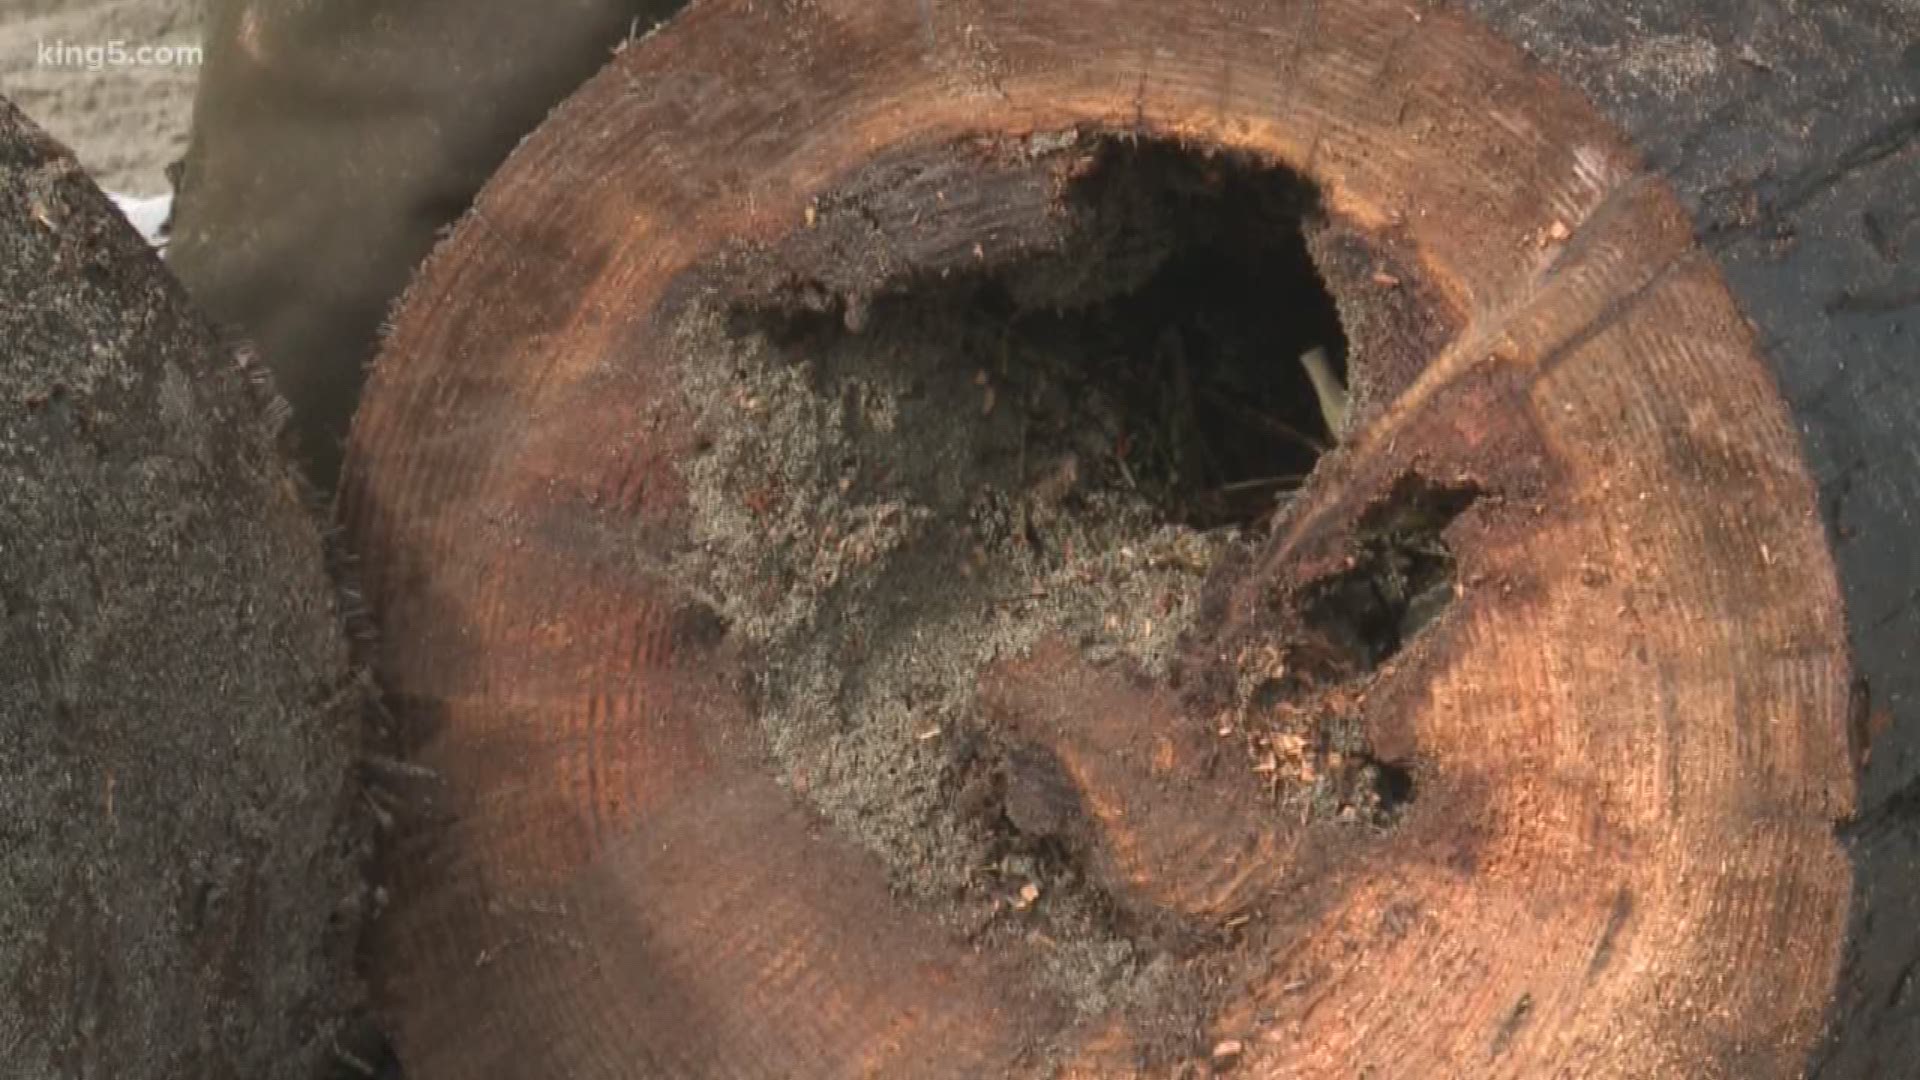 The department of natural resources is asking state lawmakers for more money to speed up the removal of highly-toxic wood in Puget Sound. KING 5 Environmental Reporter Alison Morrow shows us why Public Lands Commissioner Hilary Franz says, the work is taking too long.